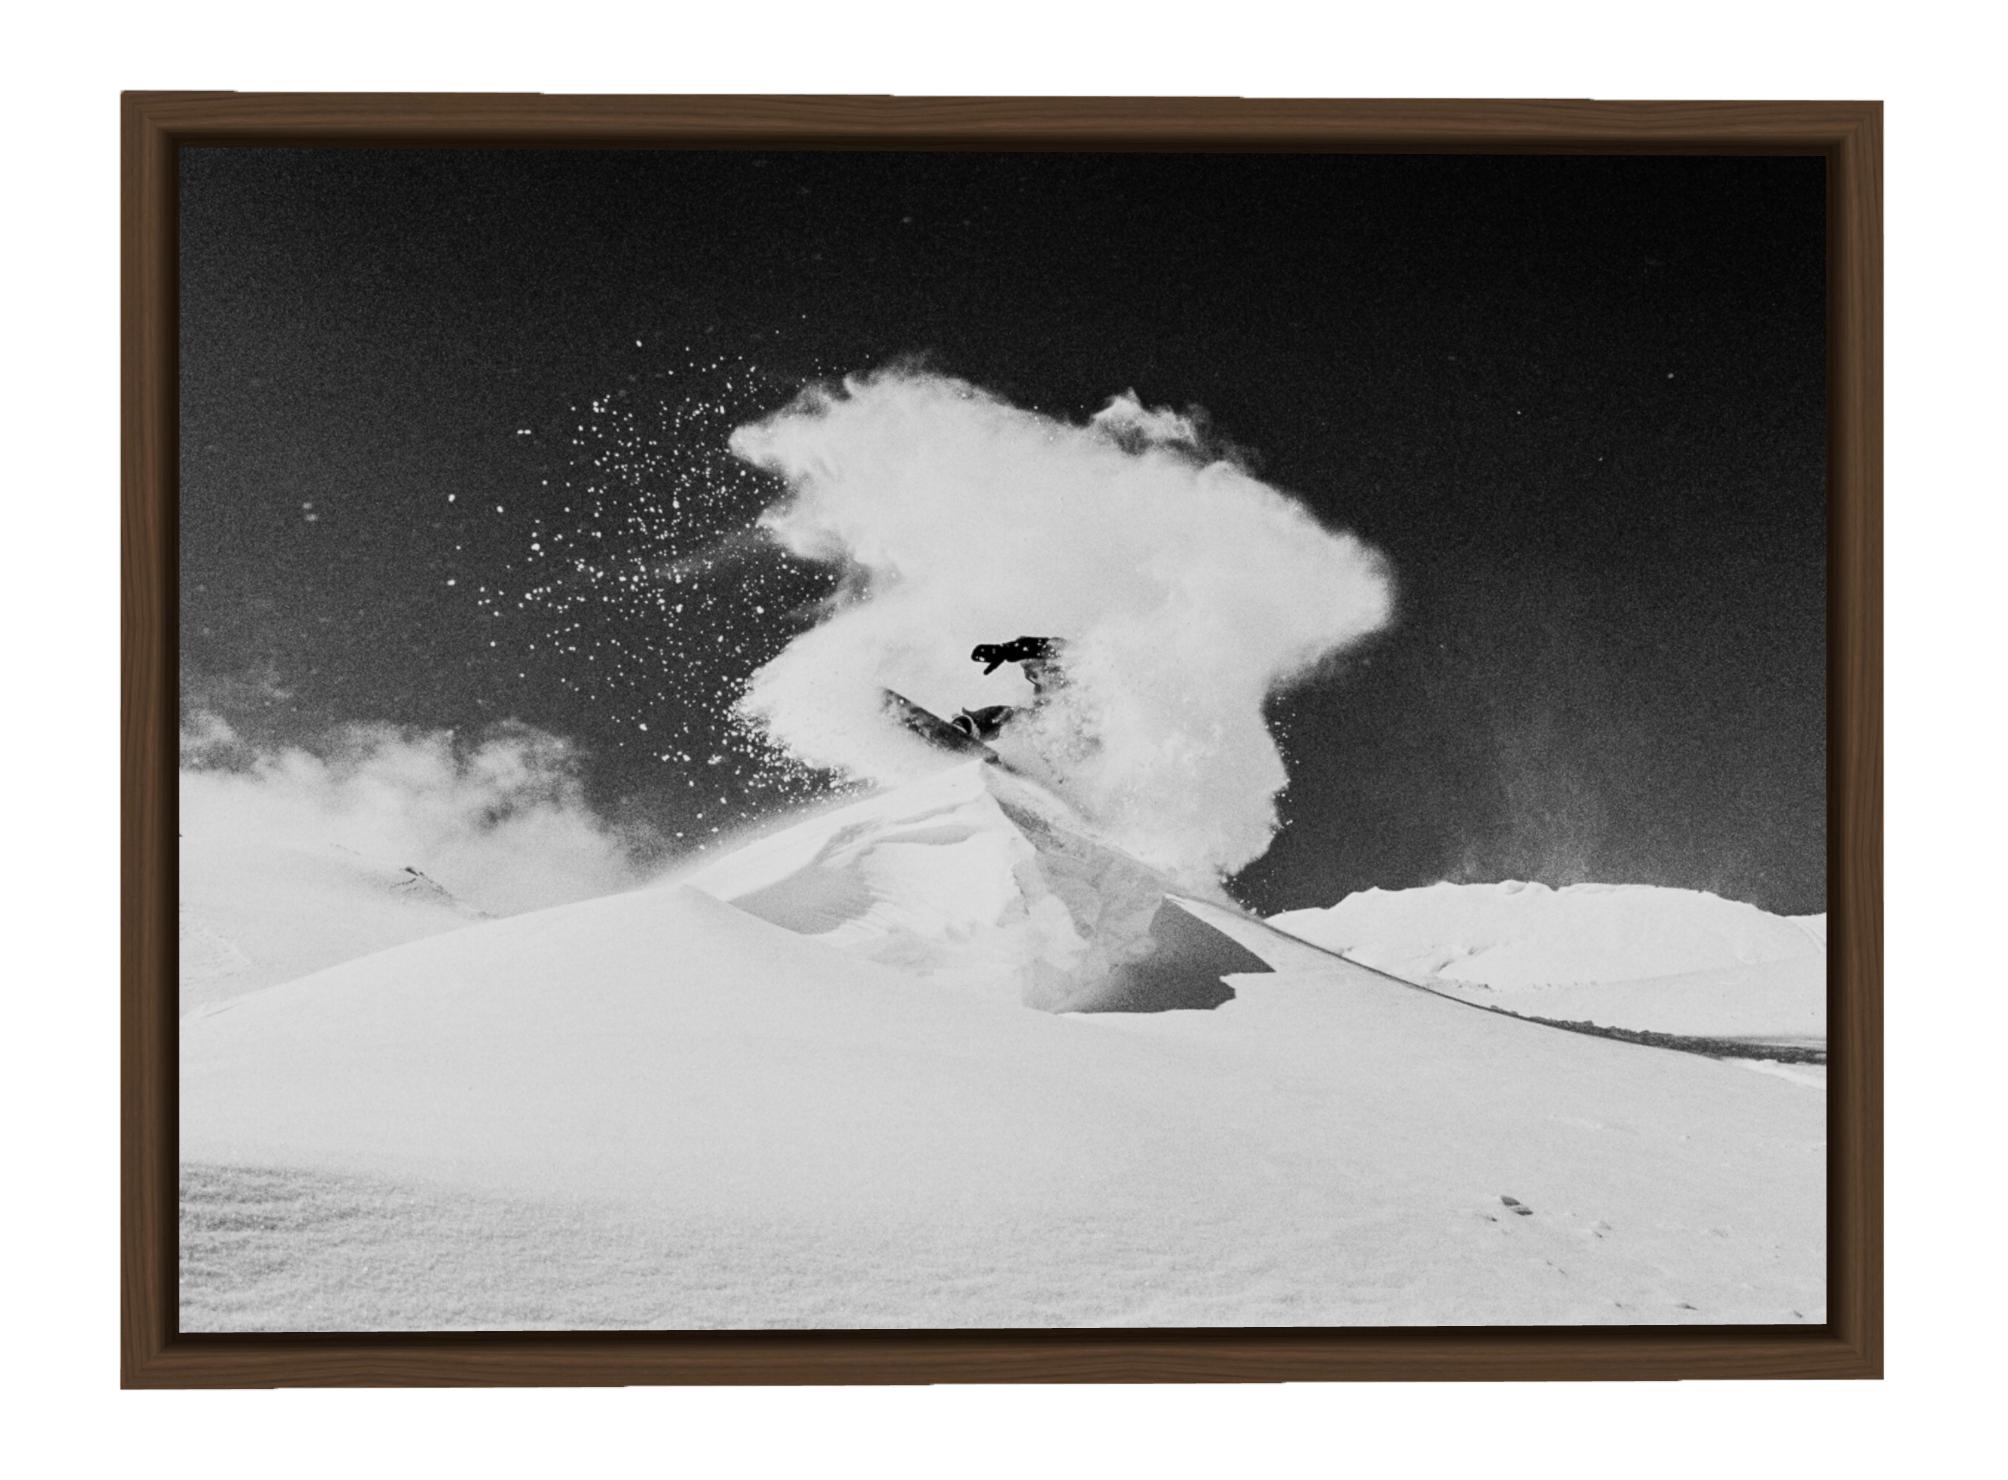 Snowdance - Mountain Snowboarding Black & White Art Photography - Gray Black and White Photograph by Carlos Blanchard